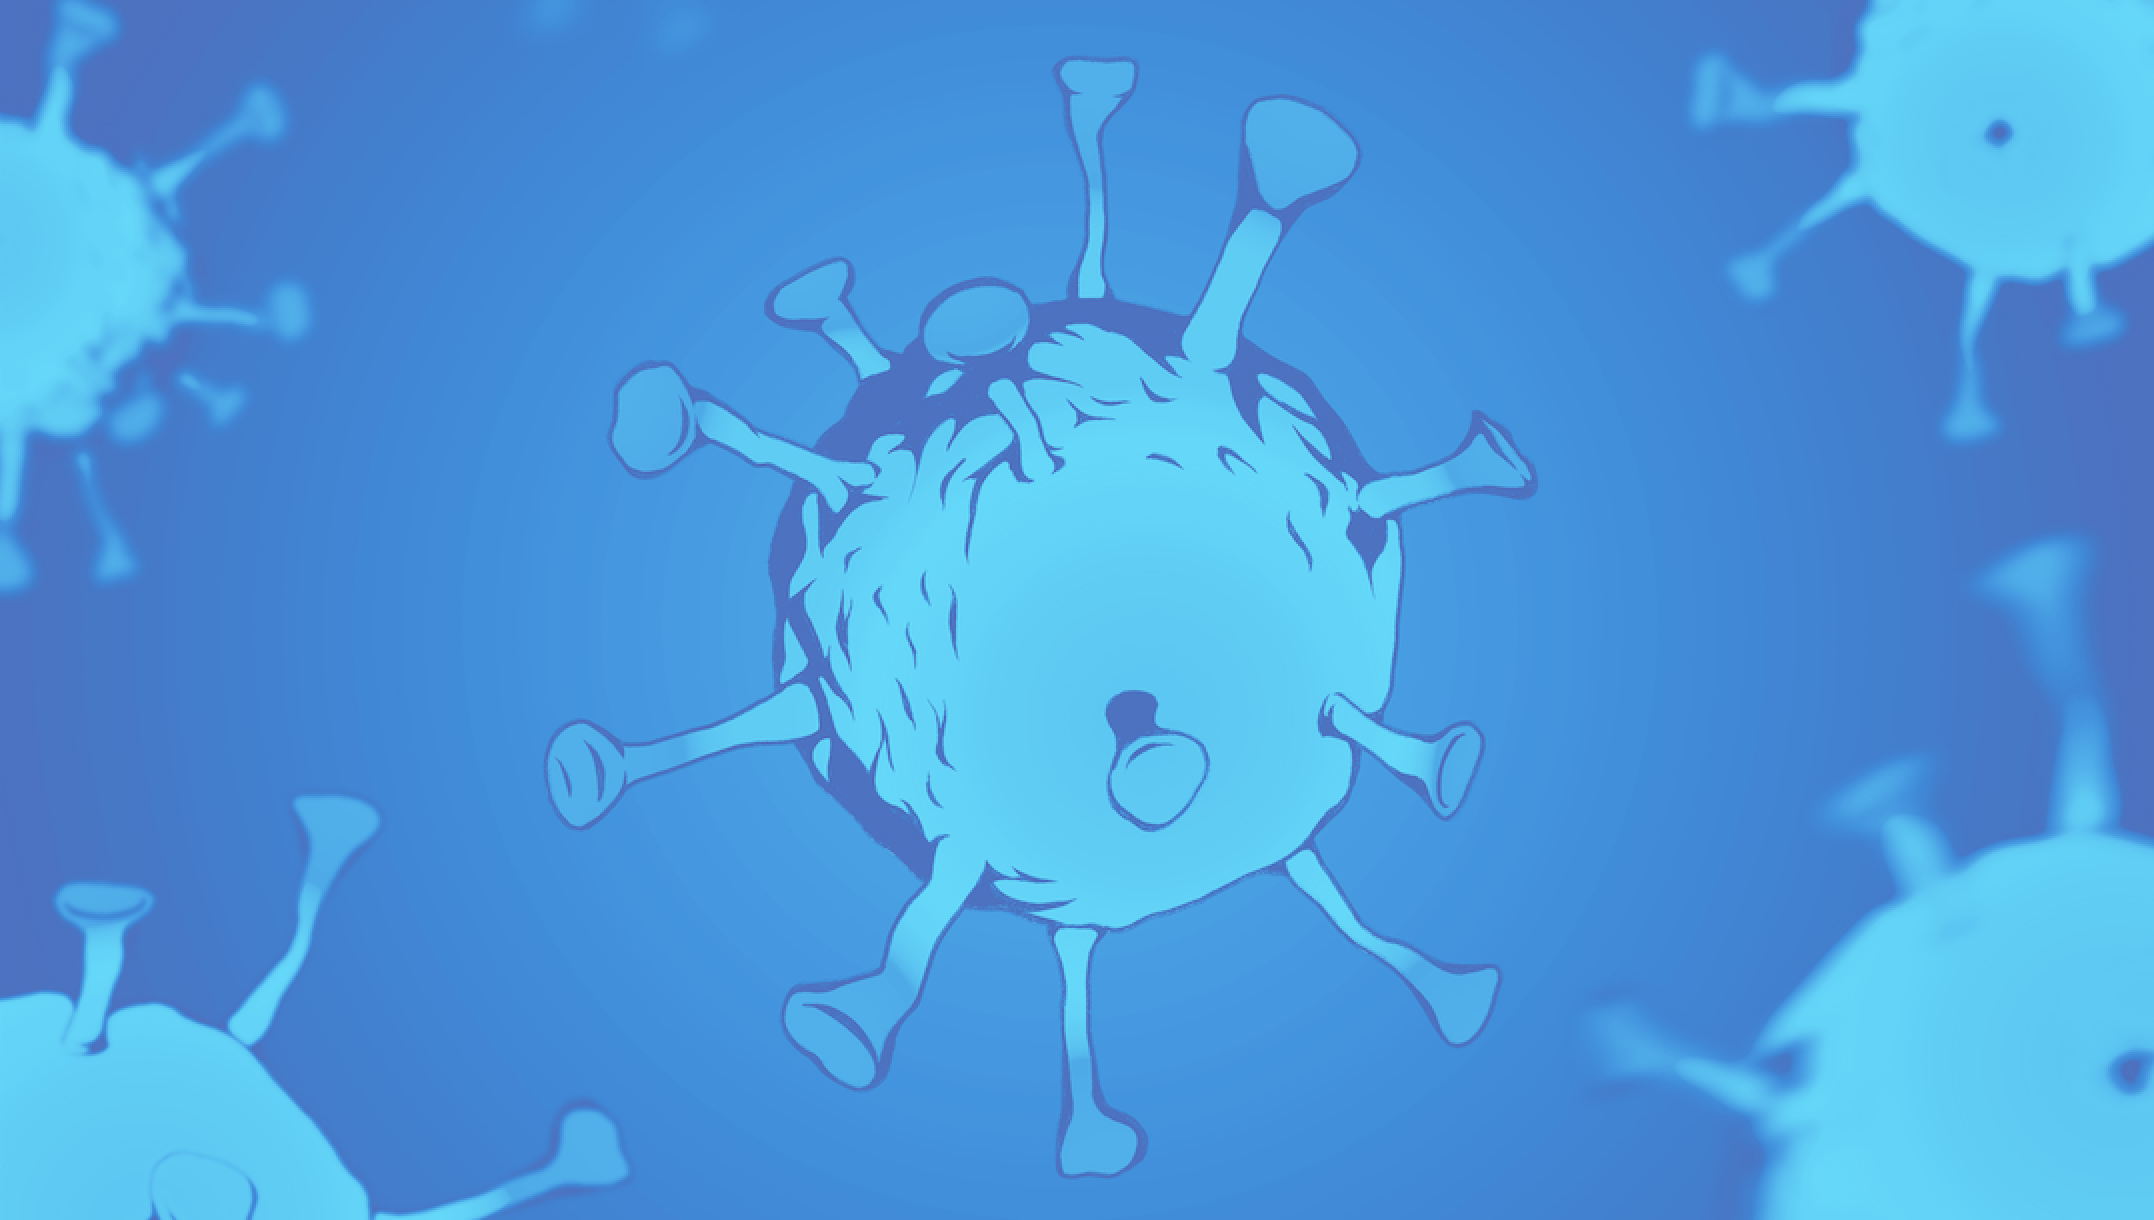 A SARS-CoV-2 virus, depicted in light blue against a royal blue background